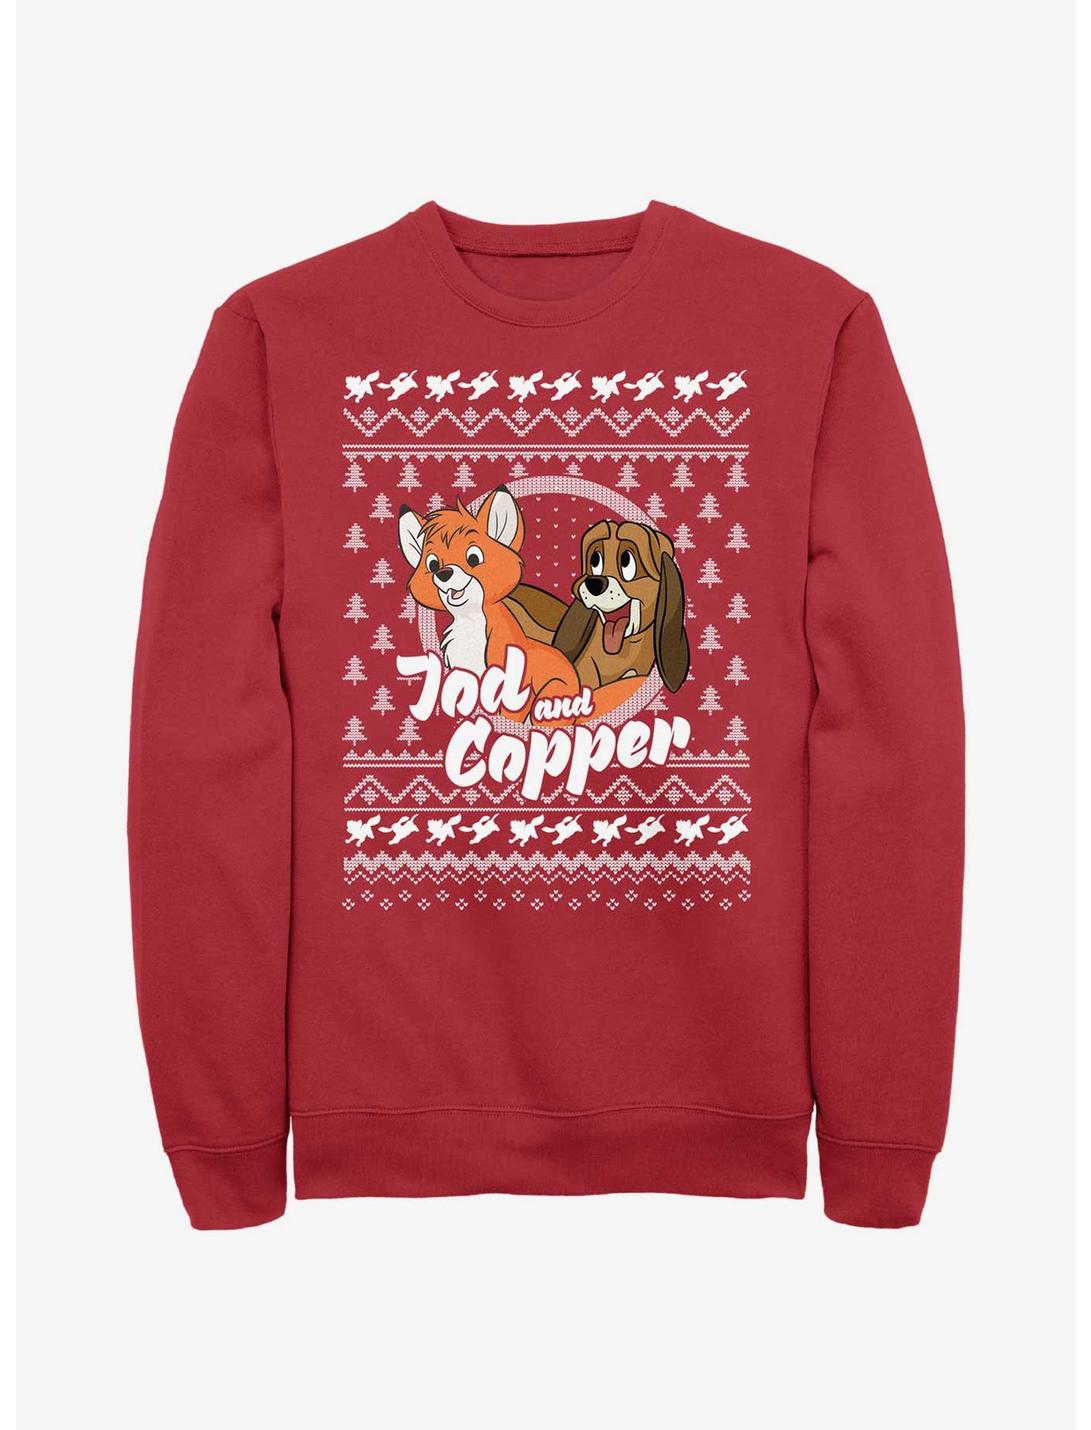 Disney The Fox and the Hound Tod and Copper Ugly Christmas Sweatshirt, RED, hi-res